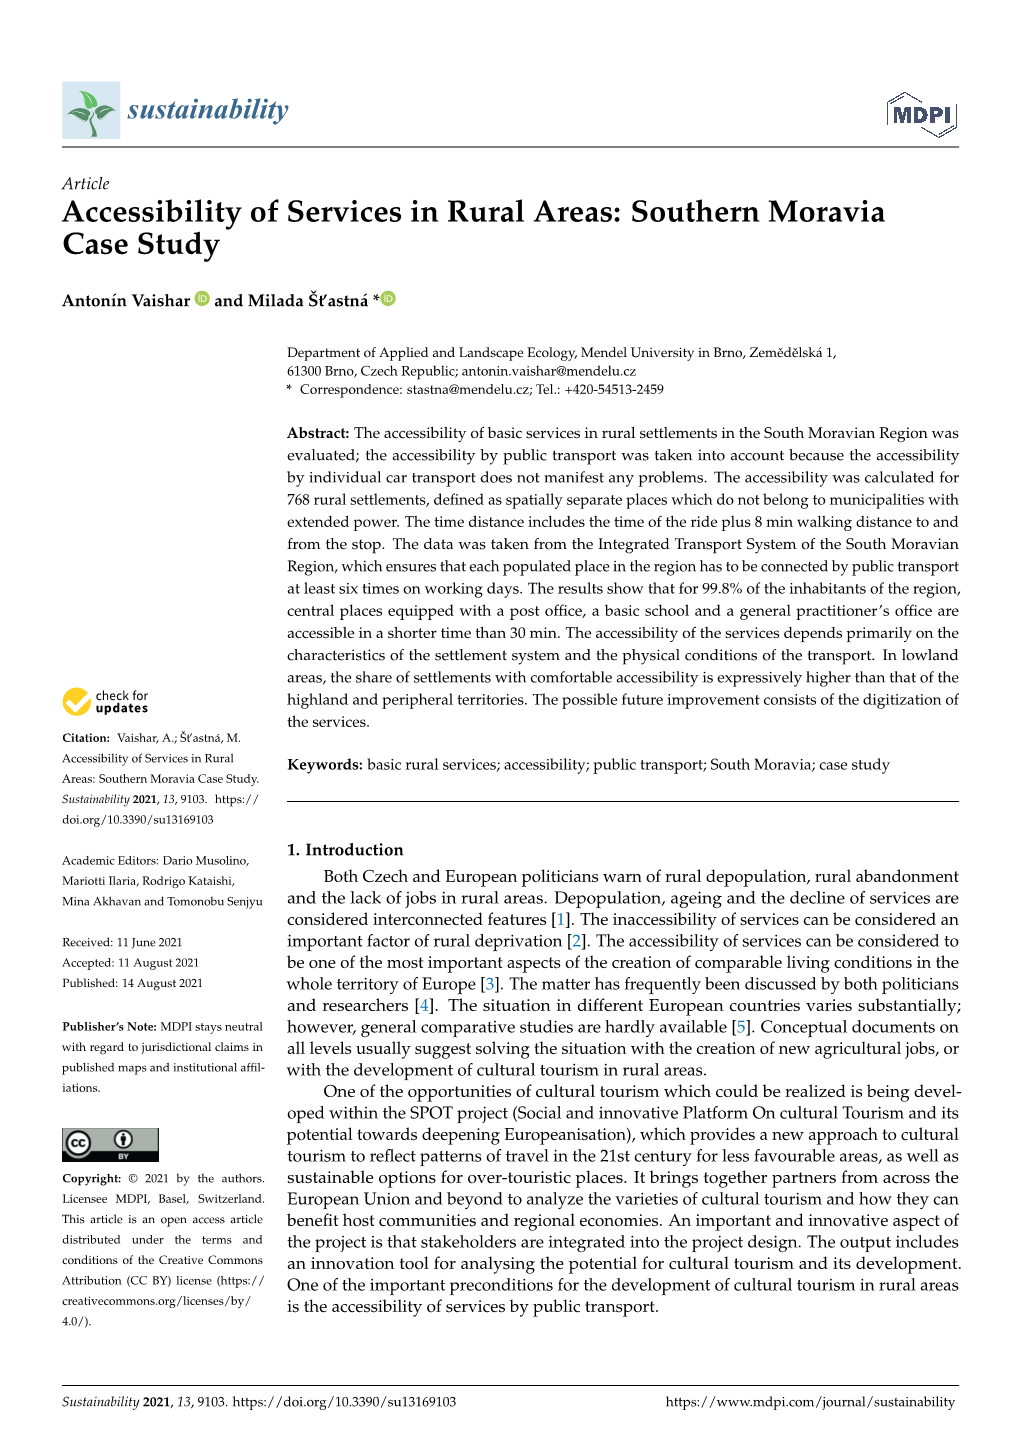 Accessibility of Services in Rural Areas: Southern Moravia Case Study